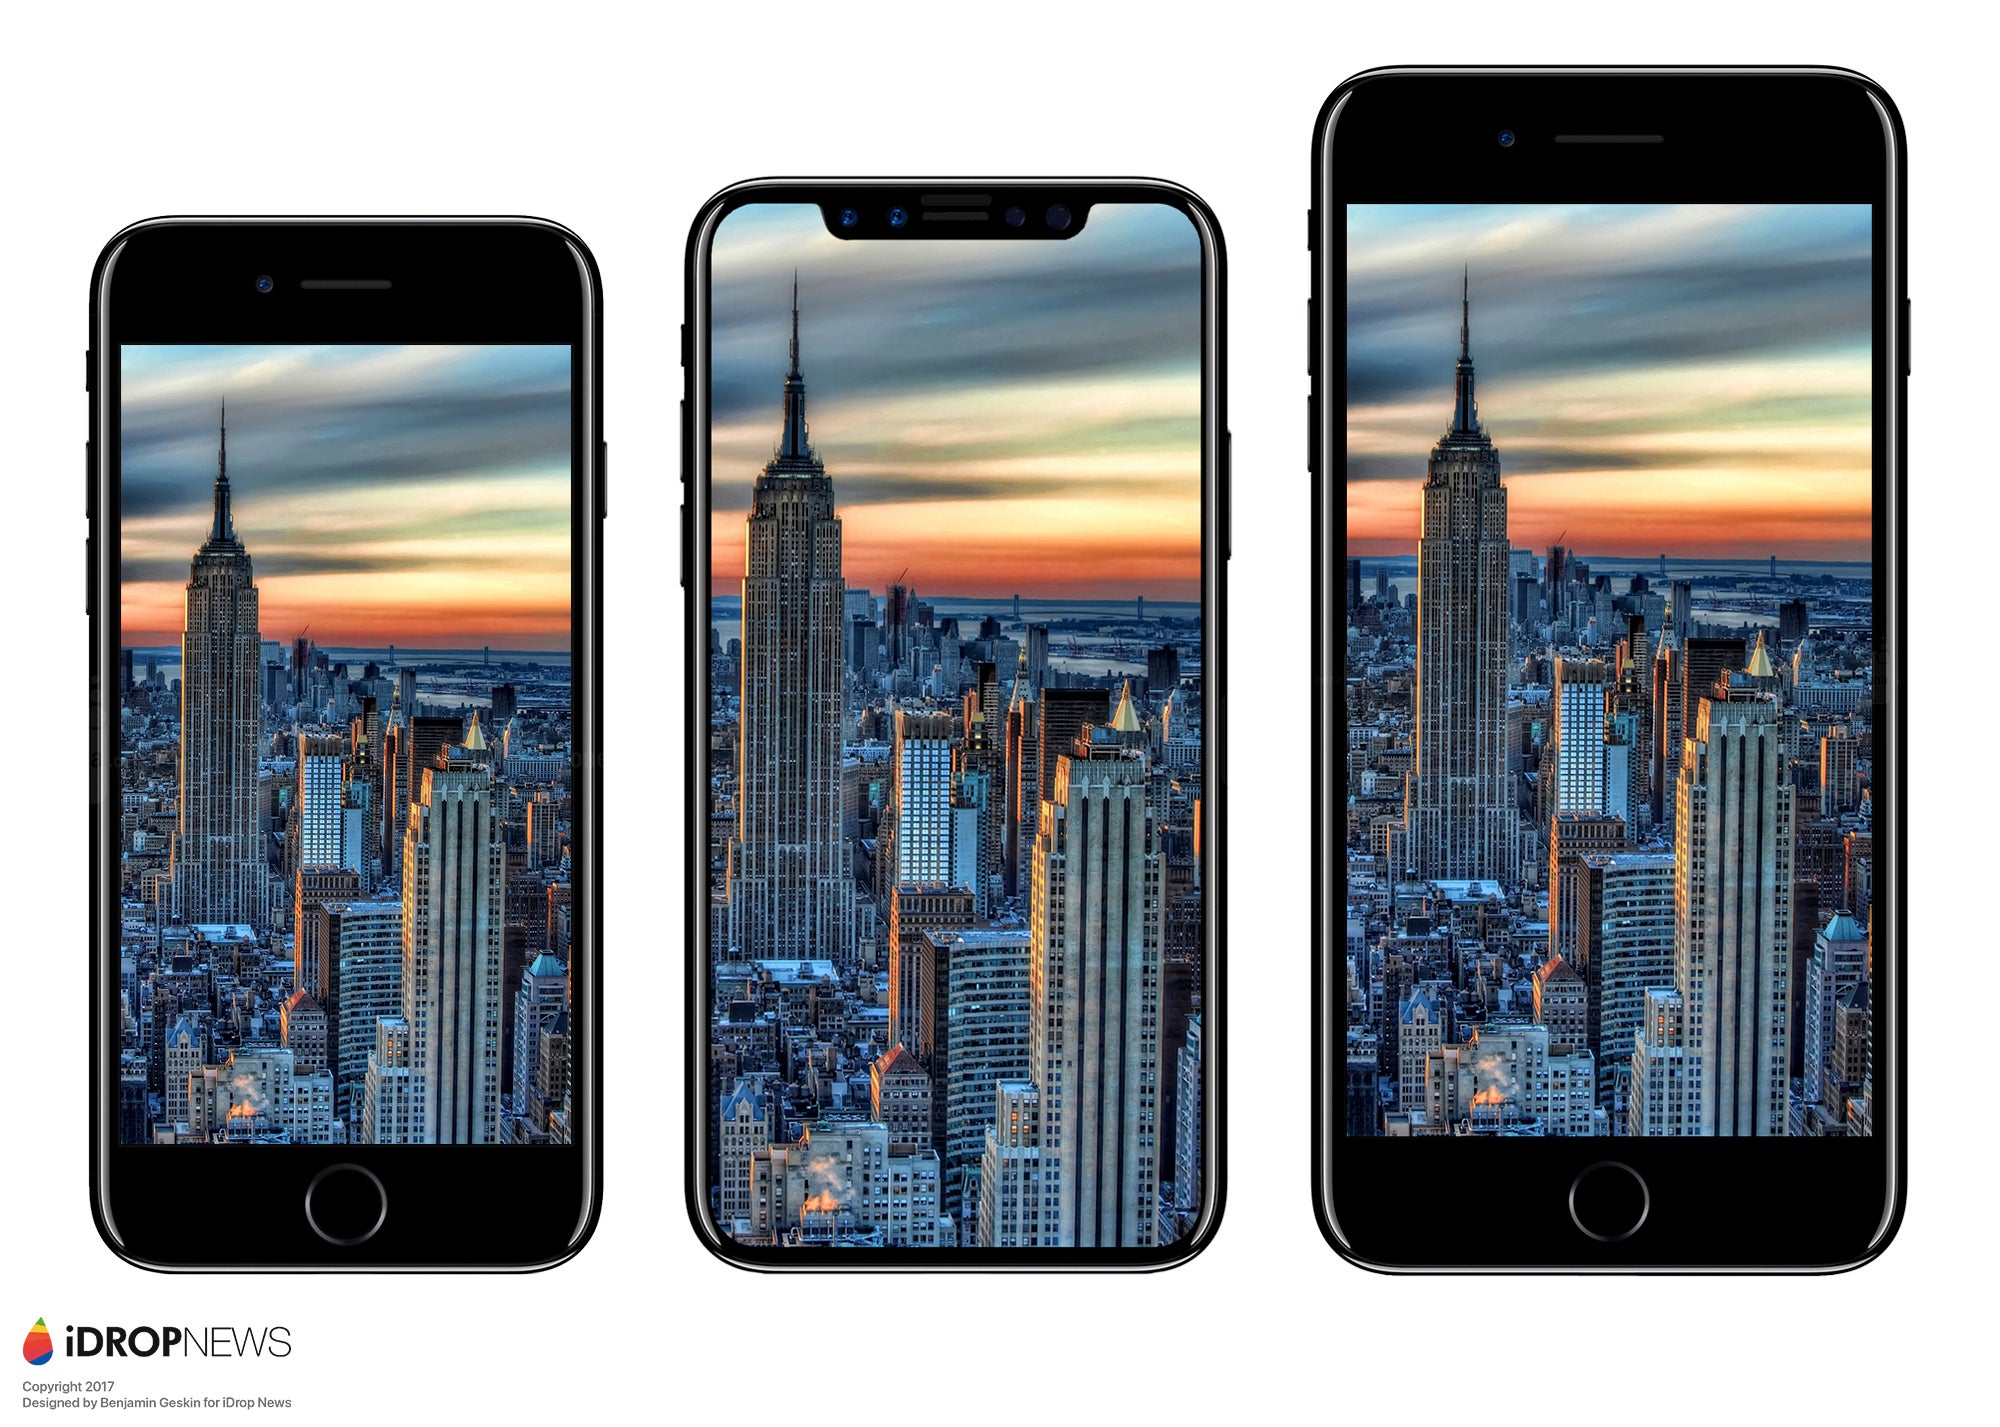 From left to right - iPhone 7, iPhone 8, iPhone 7 Plus - Apple iPhone 7s, 7s Plus, iPhone 8 rumor review: design, specs, features, price, release date